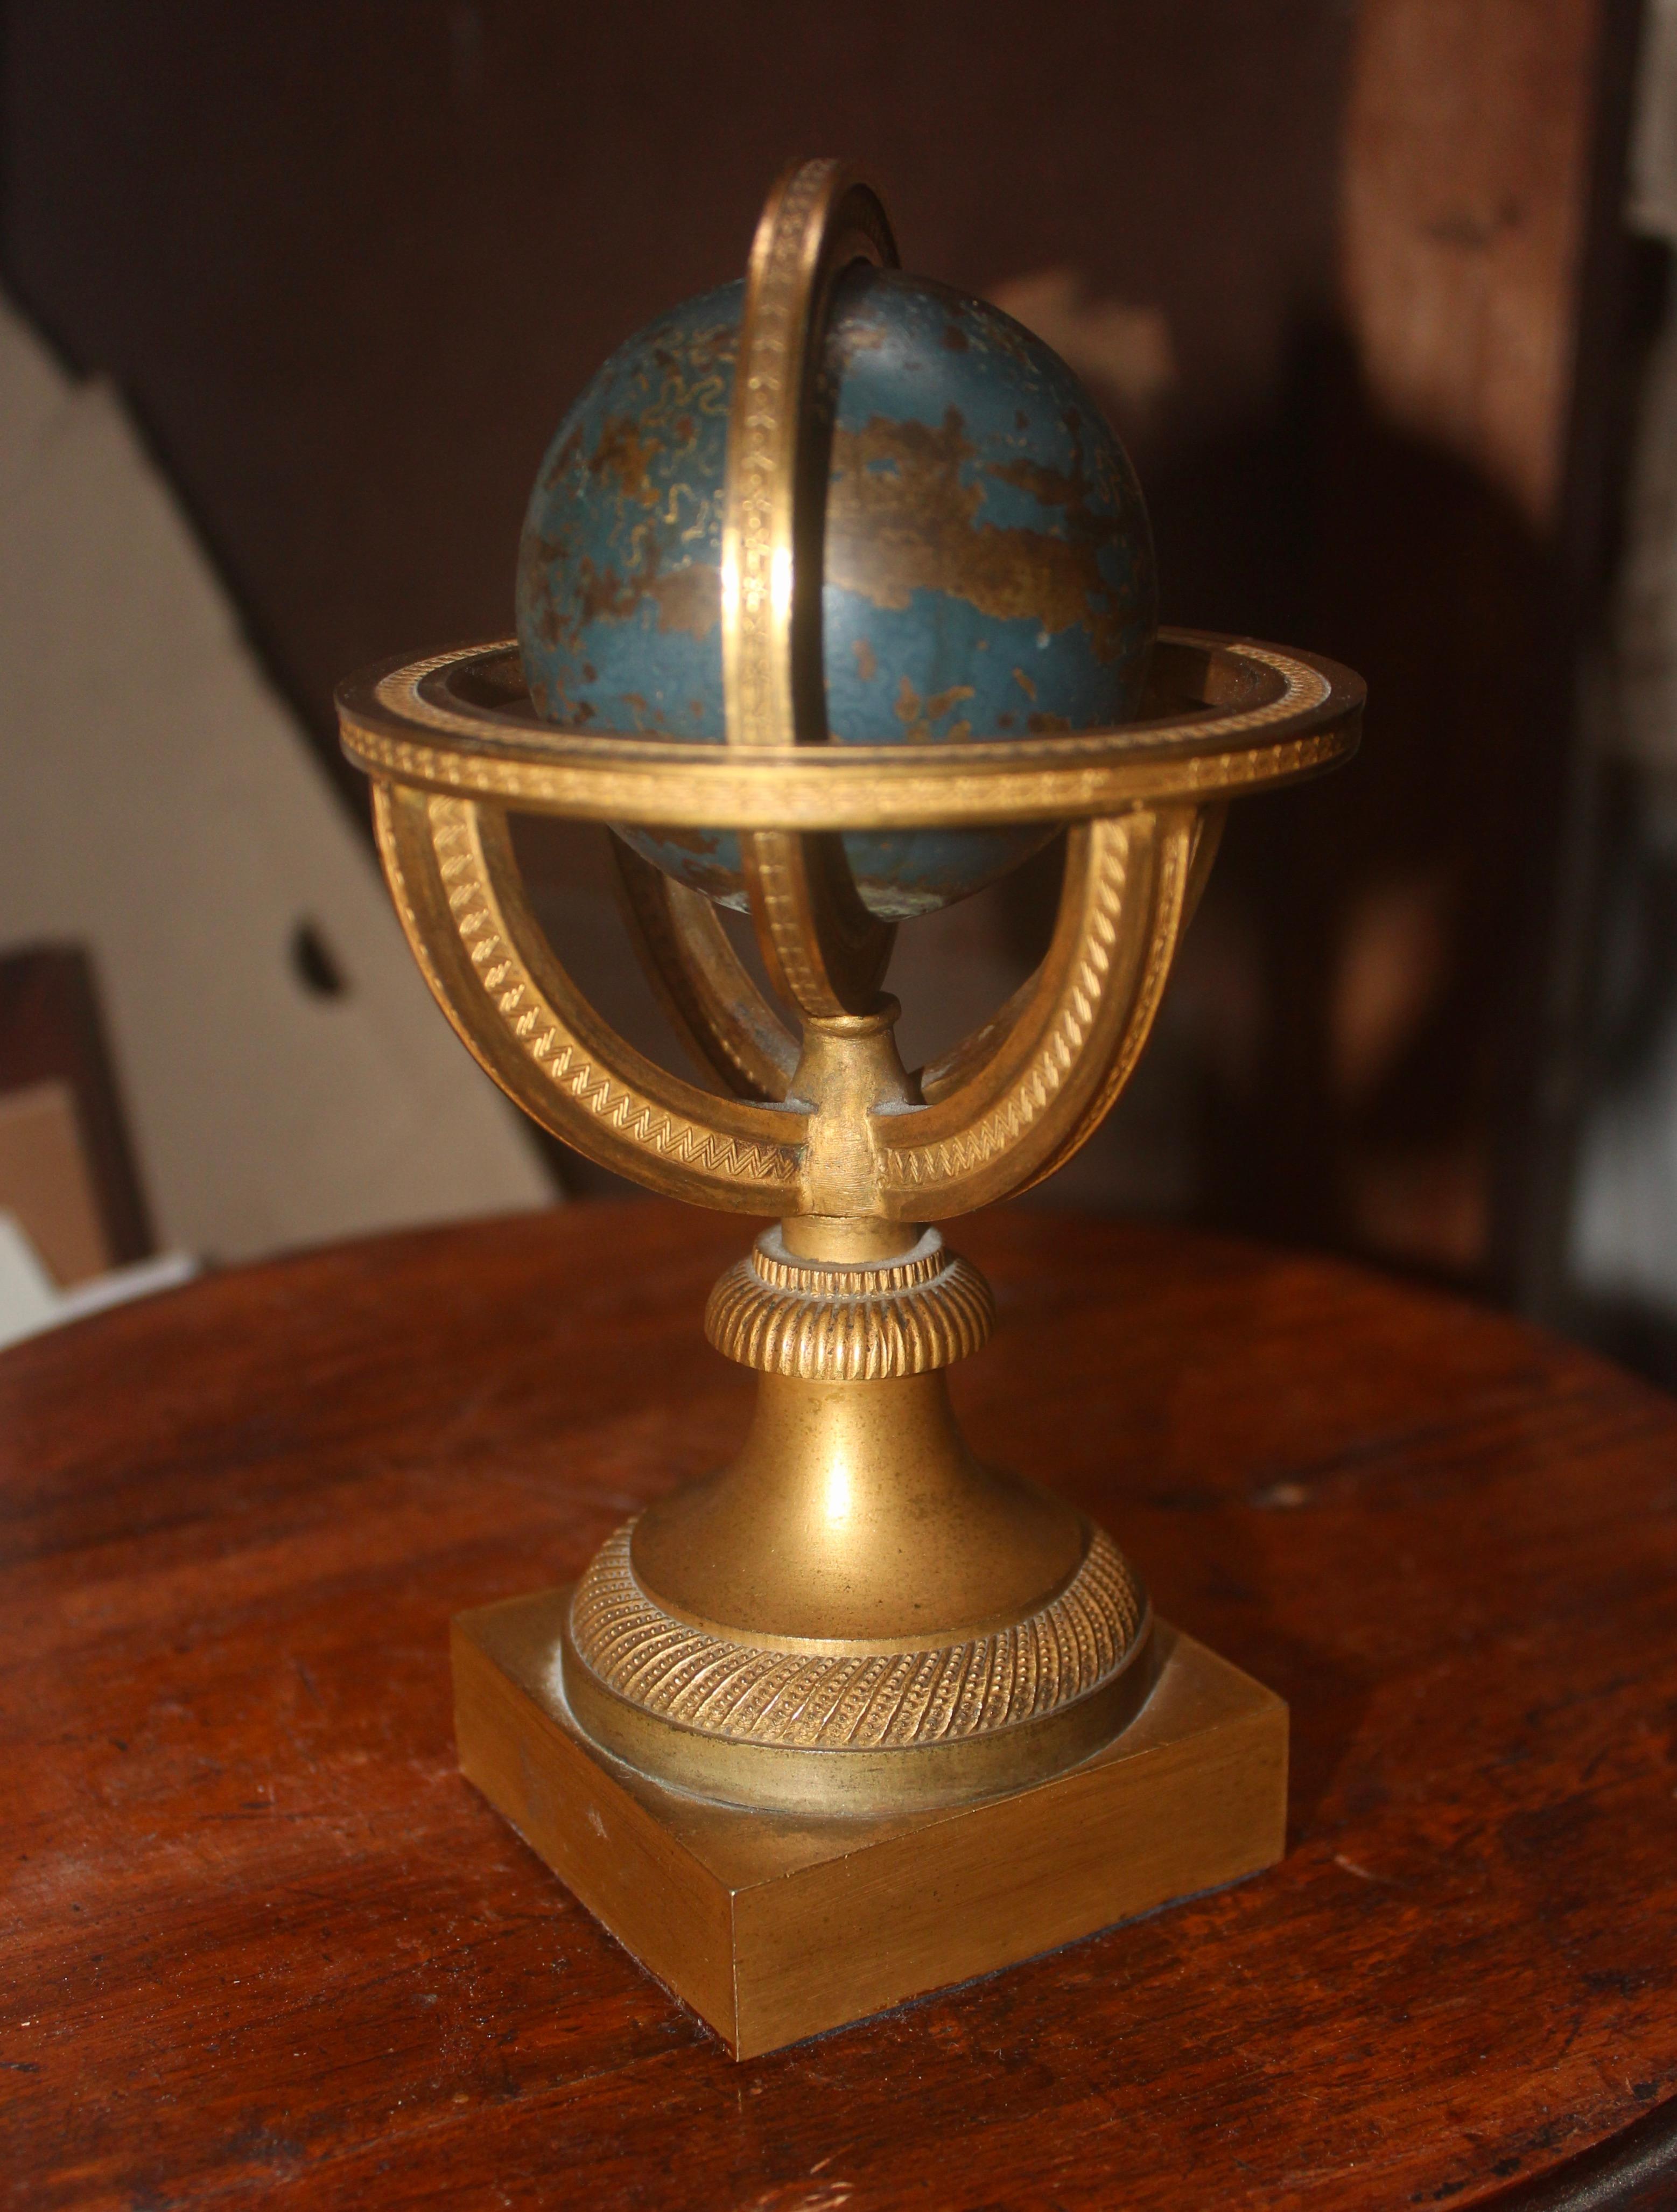 A Restauration gilded bronze and blue epargne armillary sphere and paperweight
finely chiseled and gilded bronze, the sphere in blue and gold enameled copper, resting on a pedestal and a square base,
circa 1830.